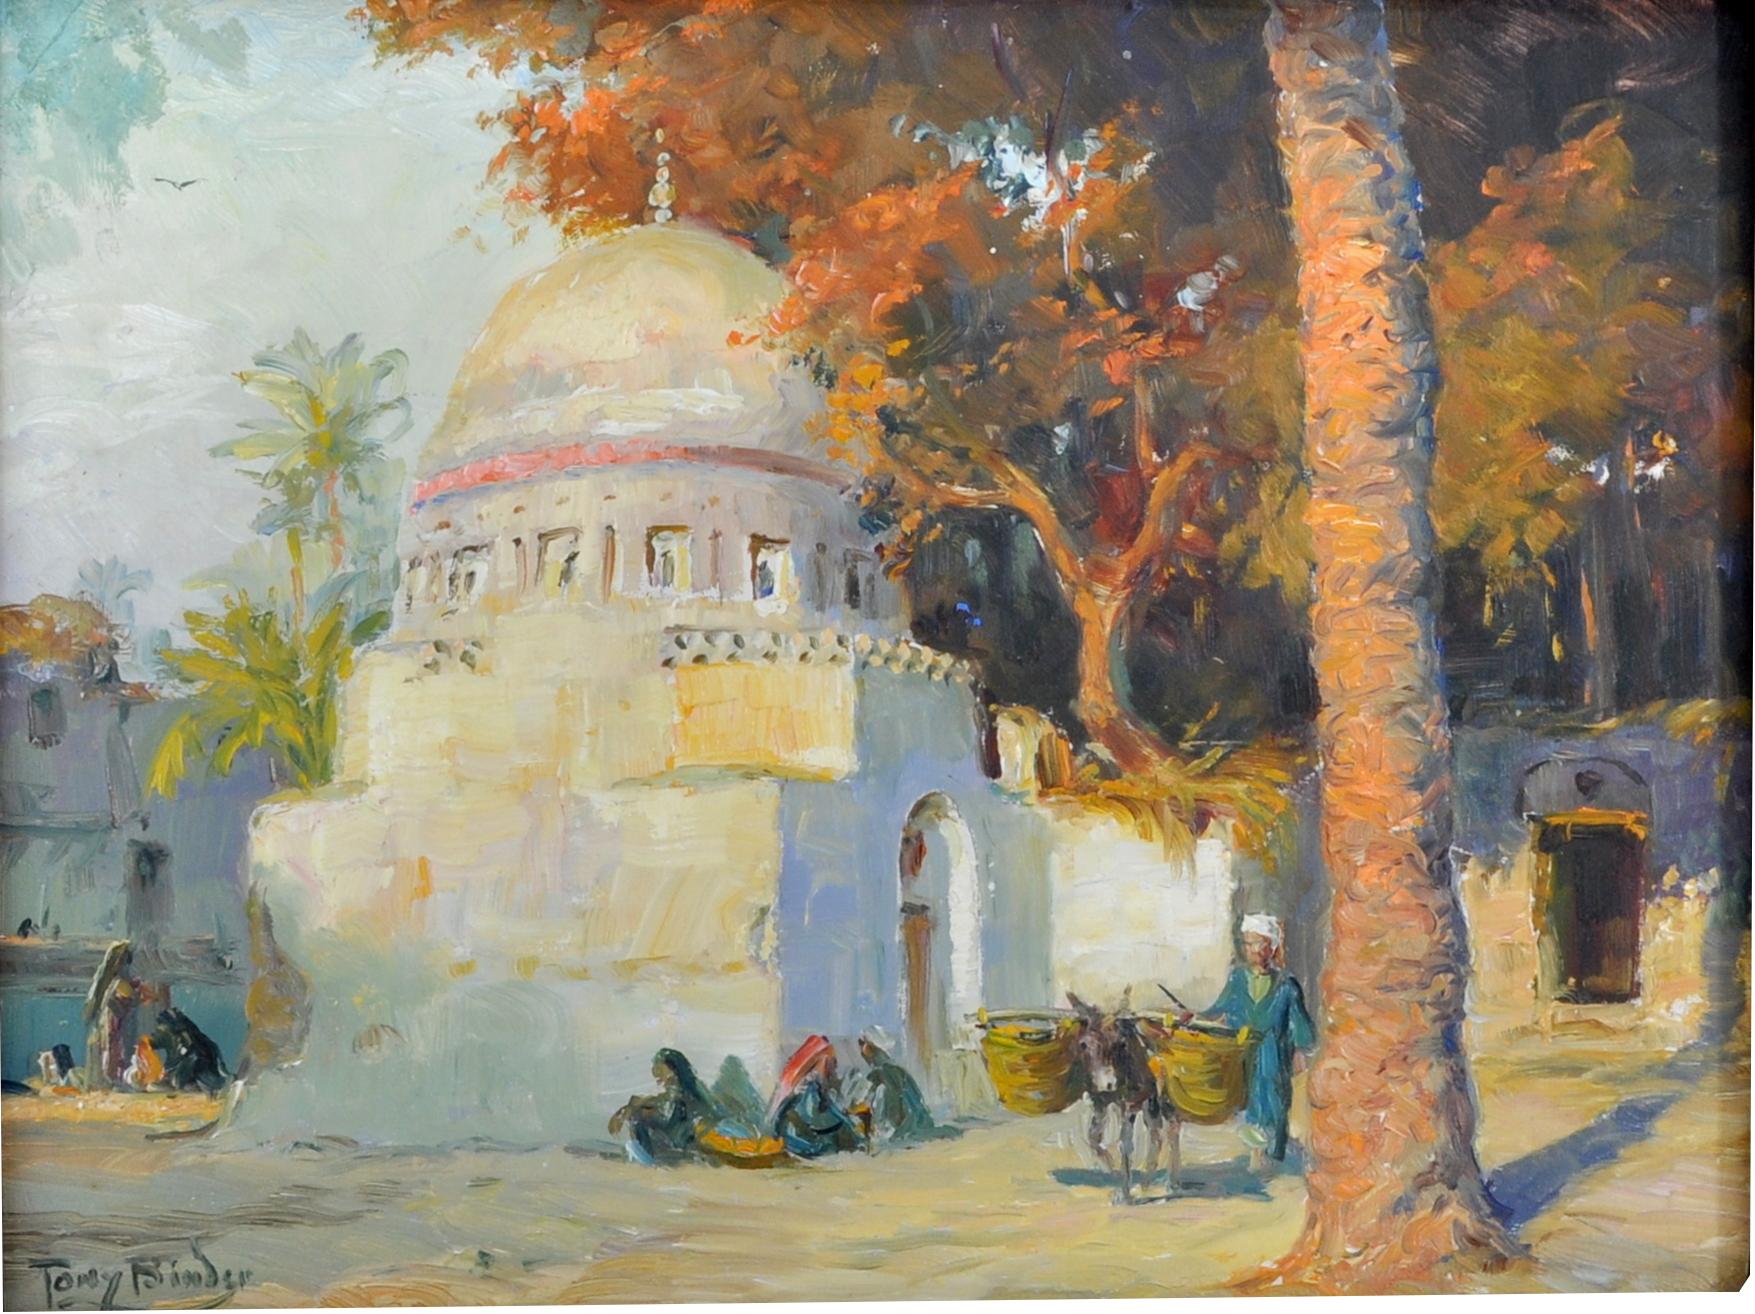 Antique orientalist painting of Cairo, Egypt by Anton 'Tony' Binder (1868-1944), oil on panel, circa 1895. The painting depicting a village scene in Cairo with a mosque and trees to the background, to the foreground a scene of village life with